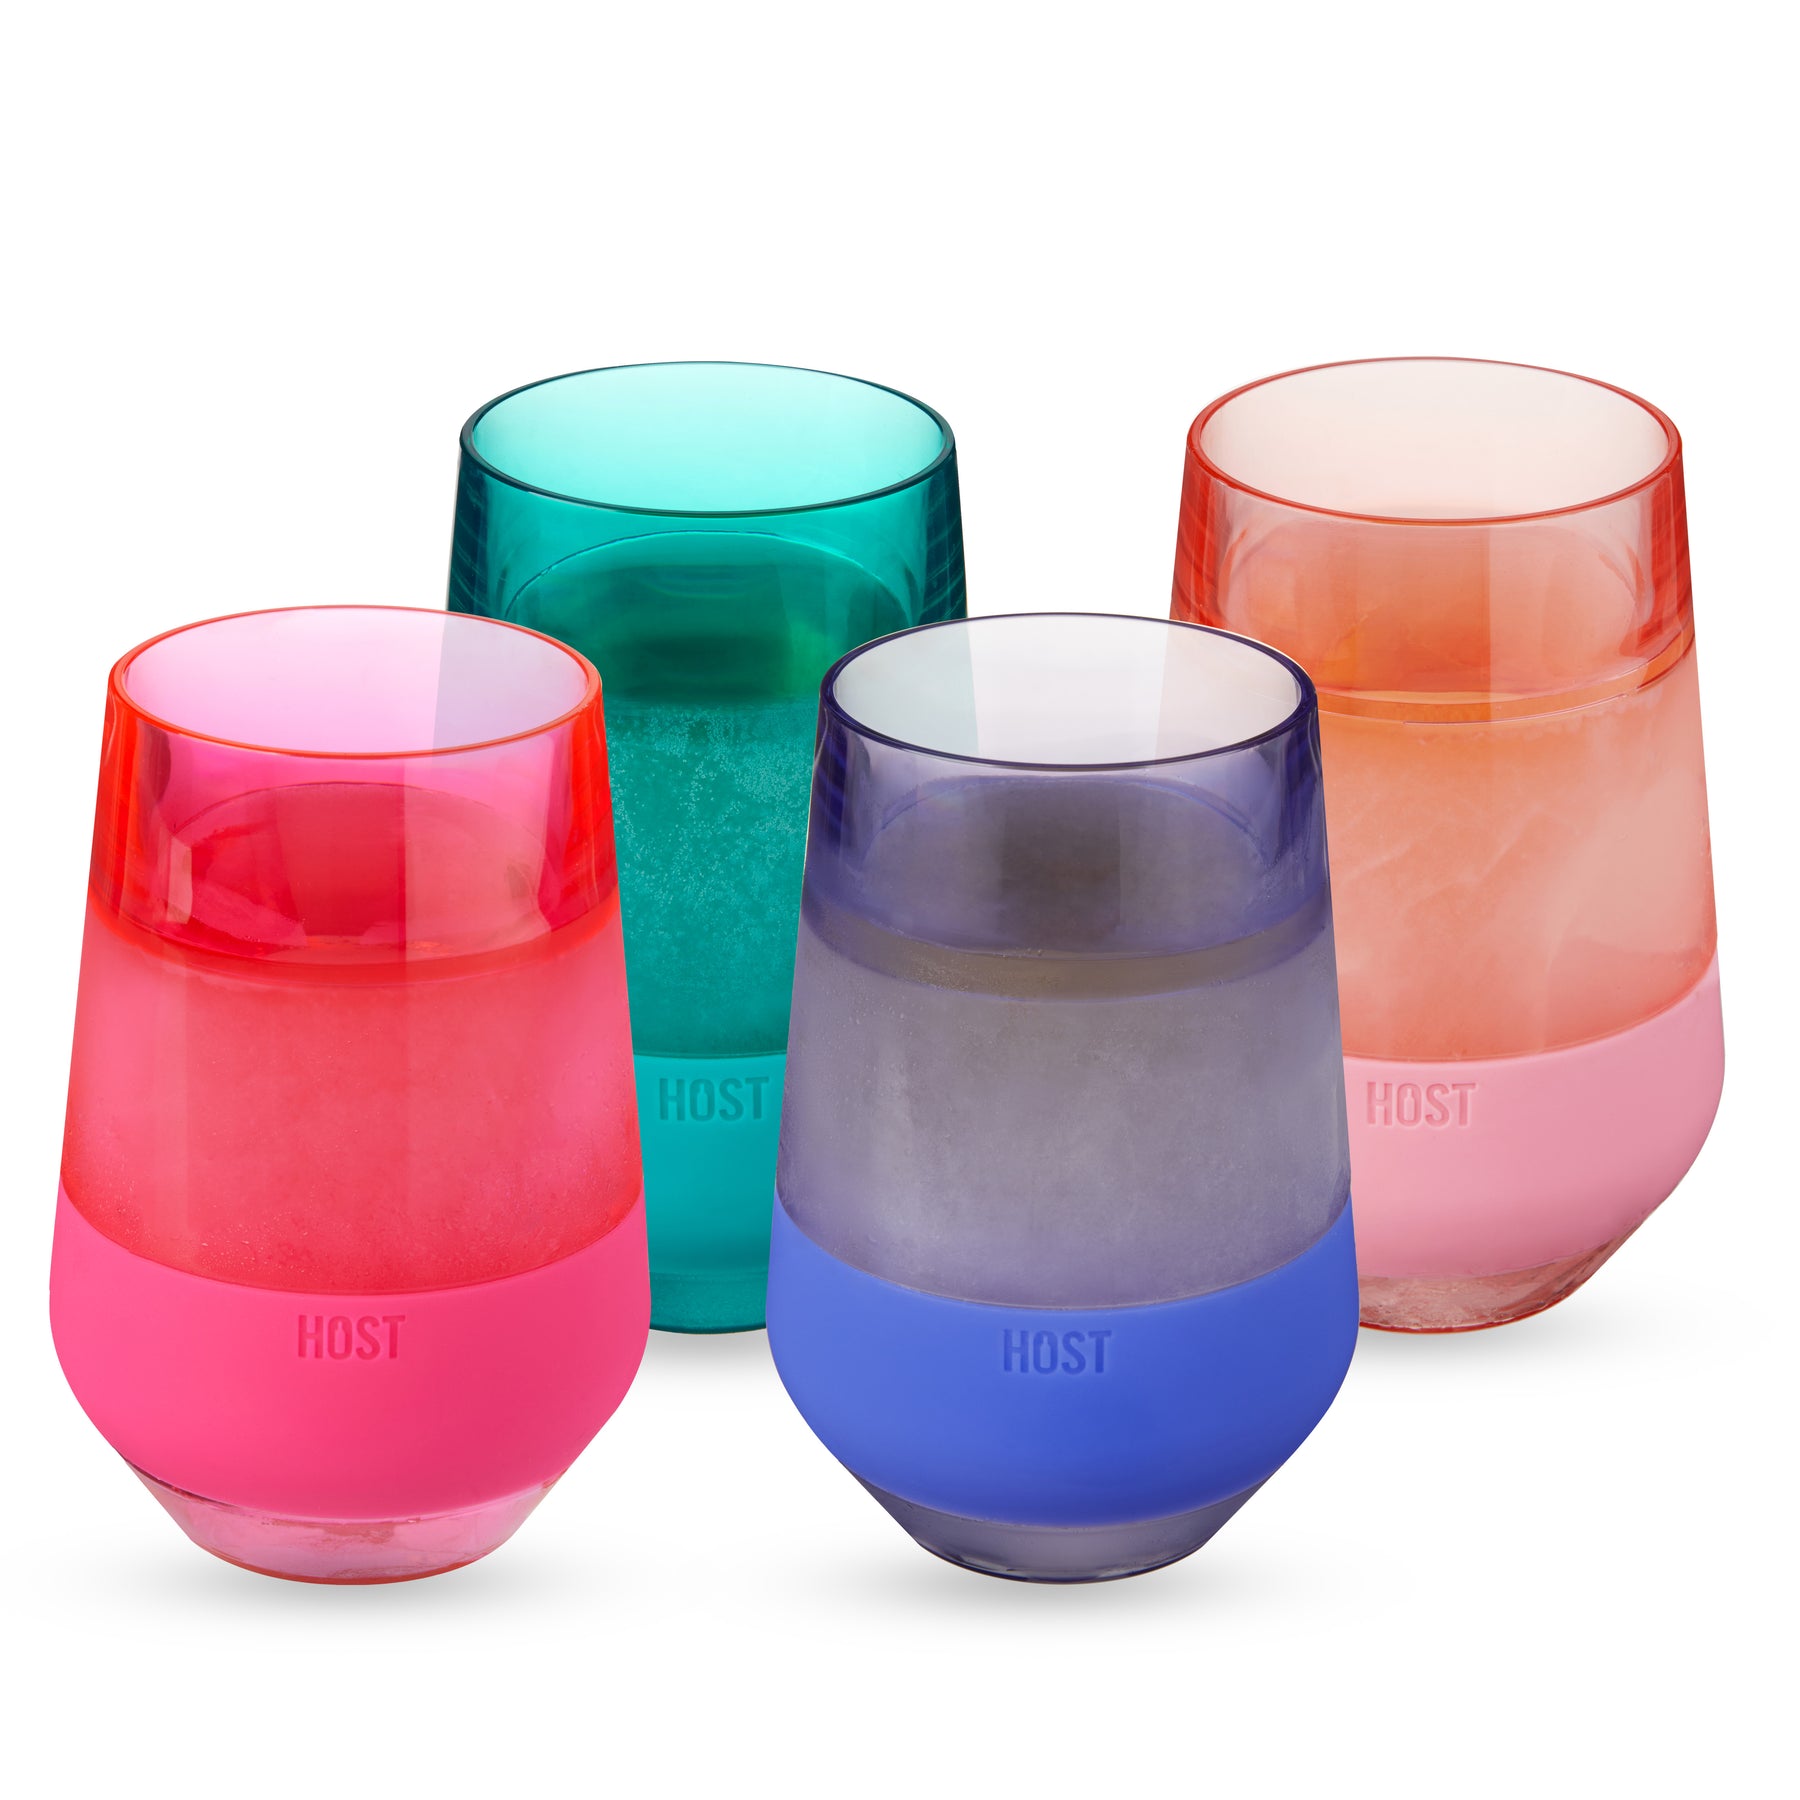 Wine FREEZE Cooling Cup - Pico's Worldwide